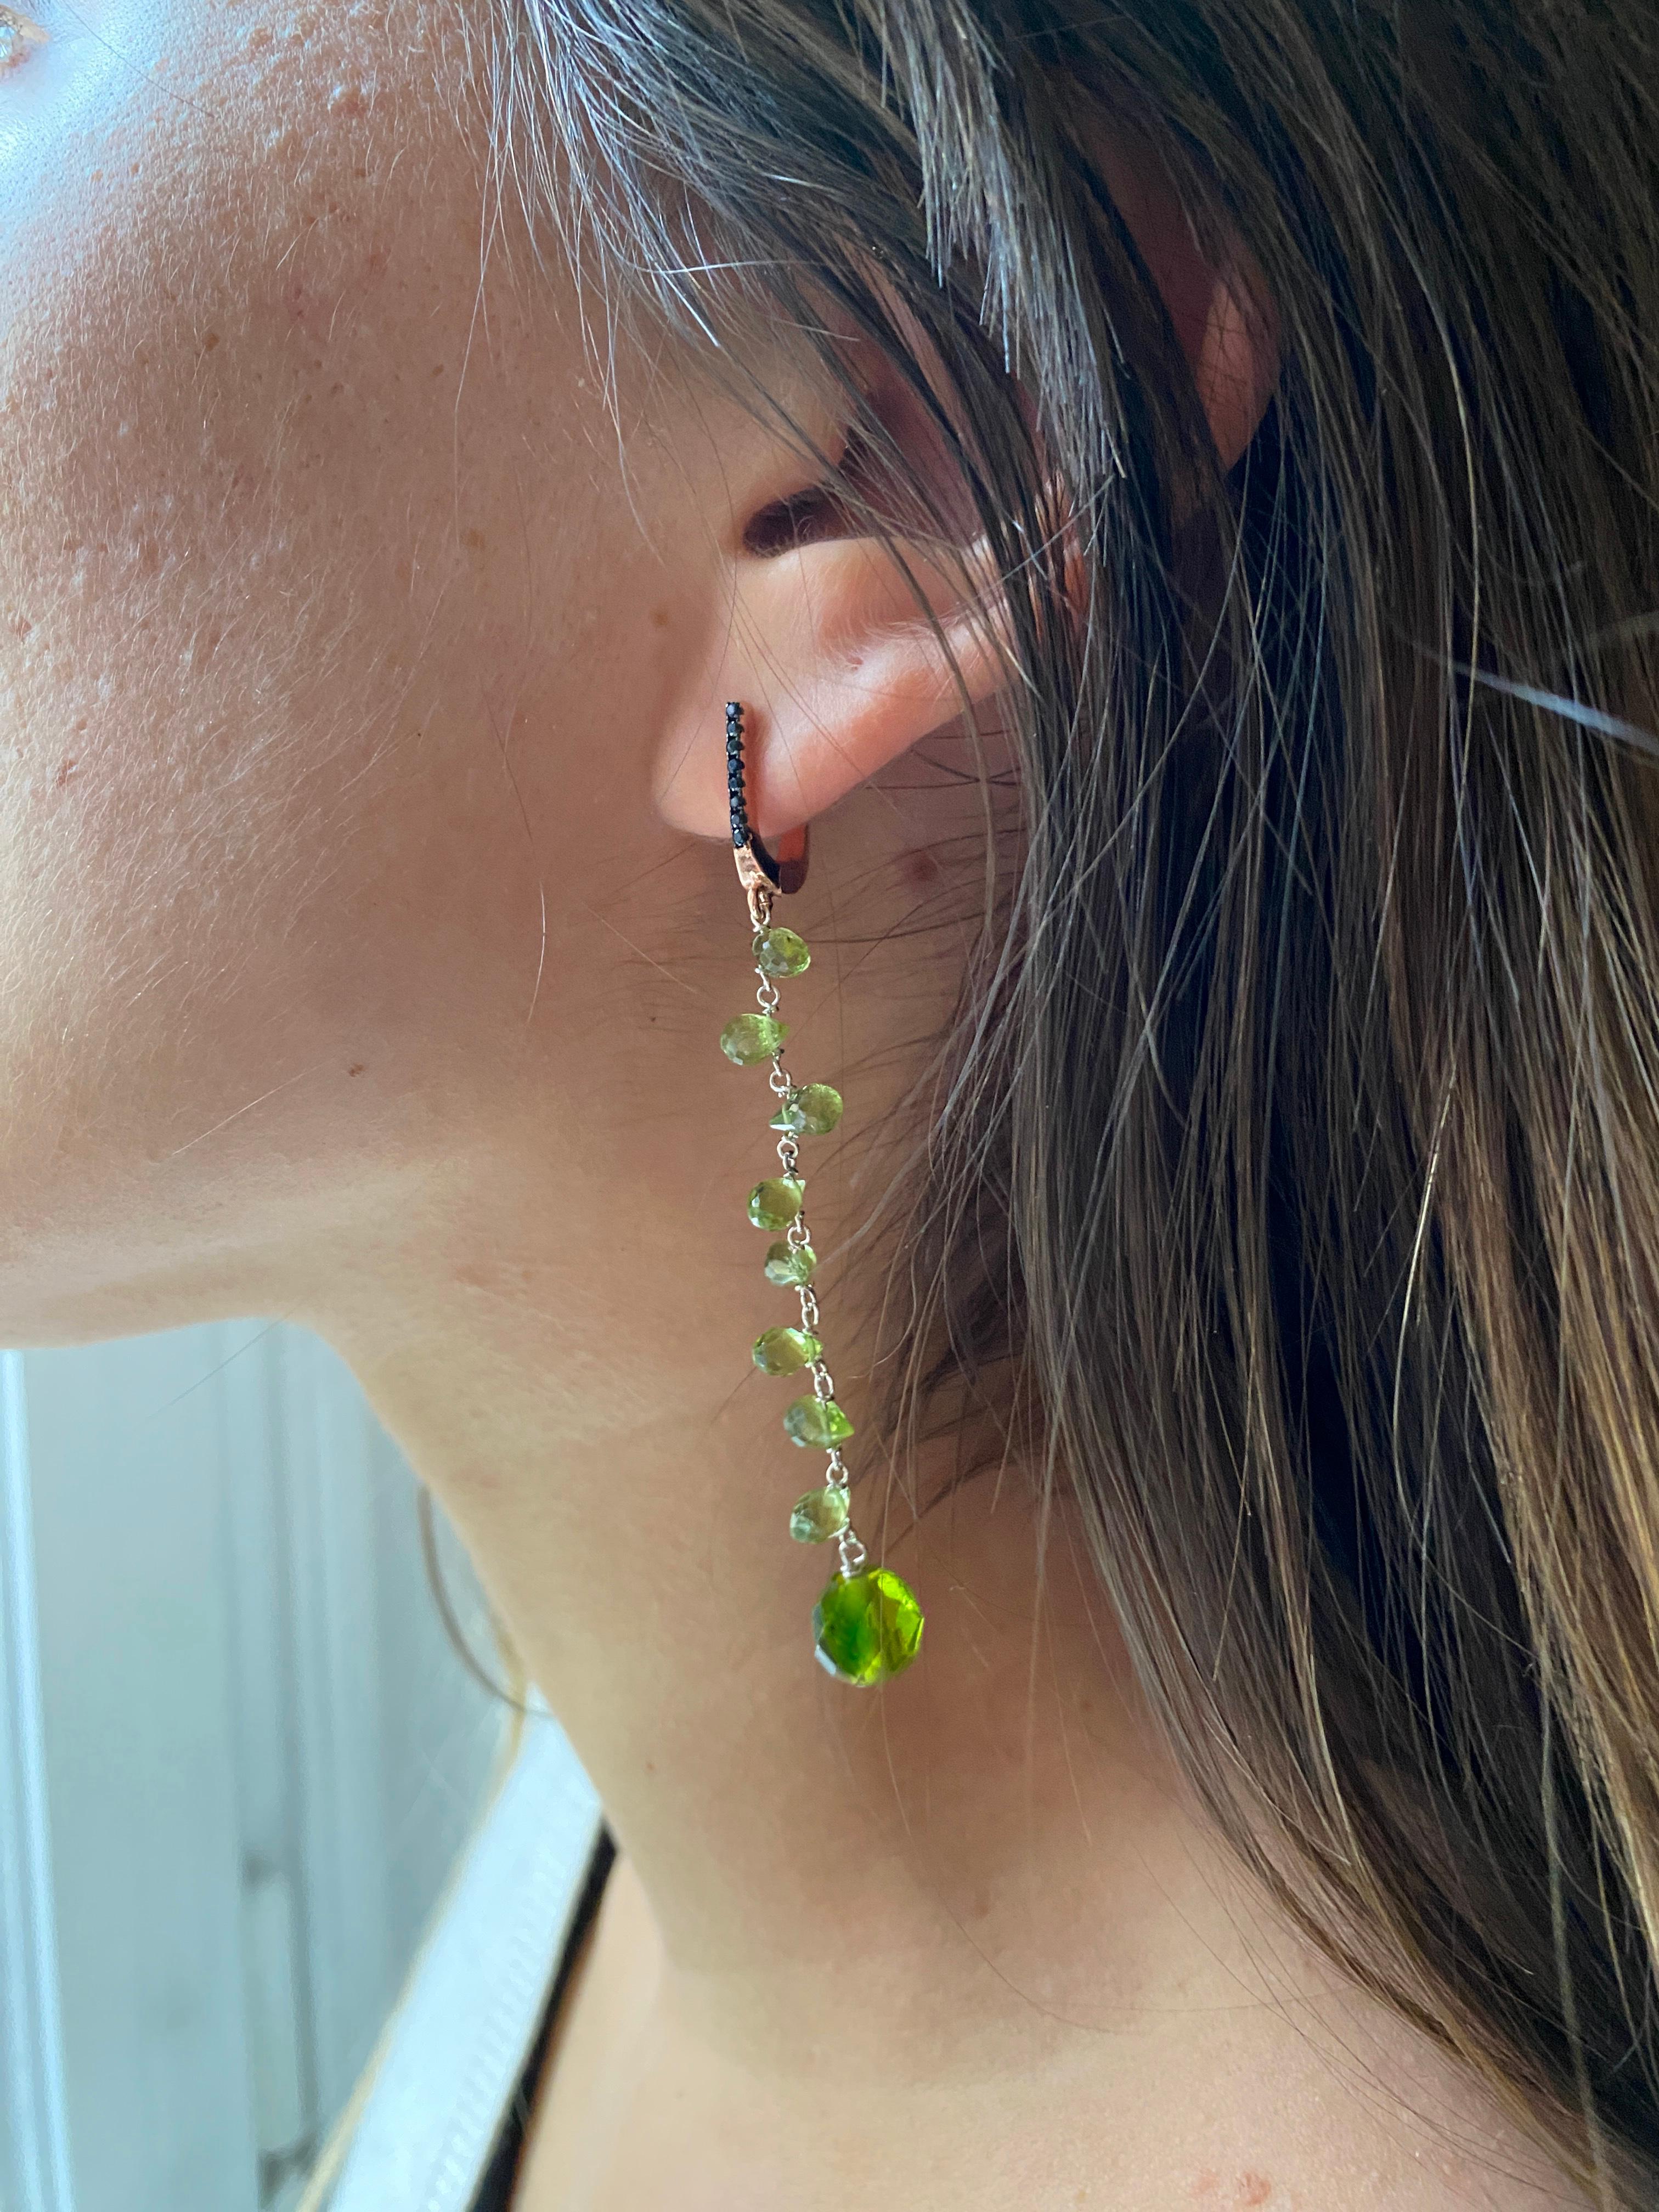 Women's Handcrafted 18k Gold Earrings Black Diamonds and Peridot Drops Italian Made For Sale